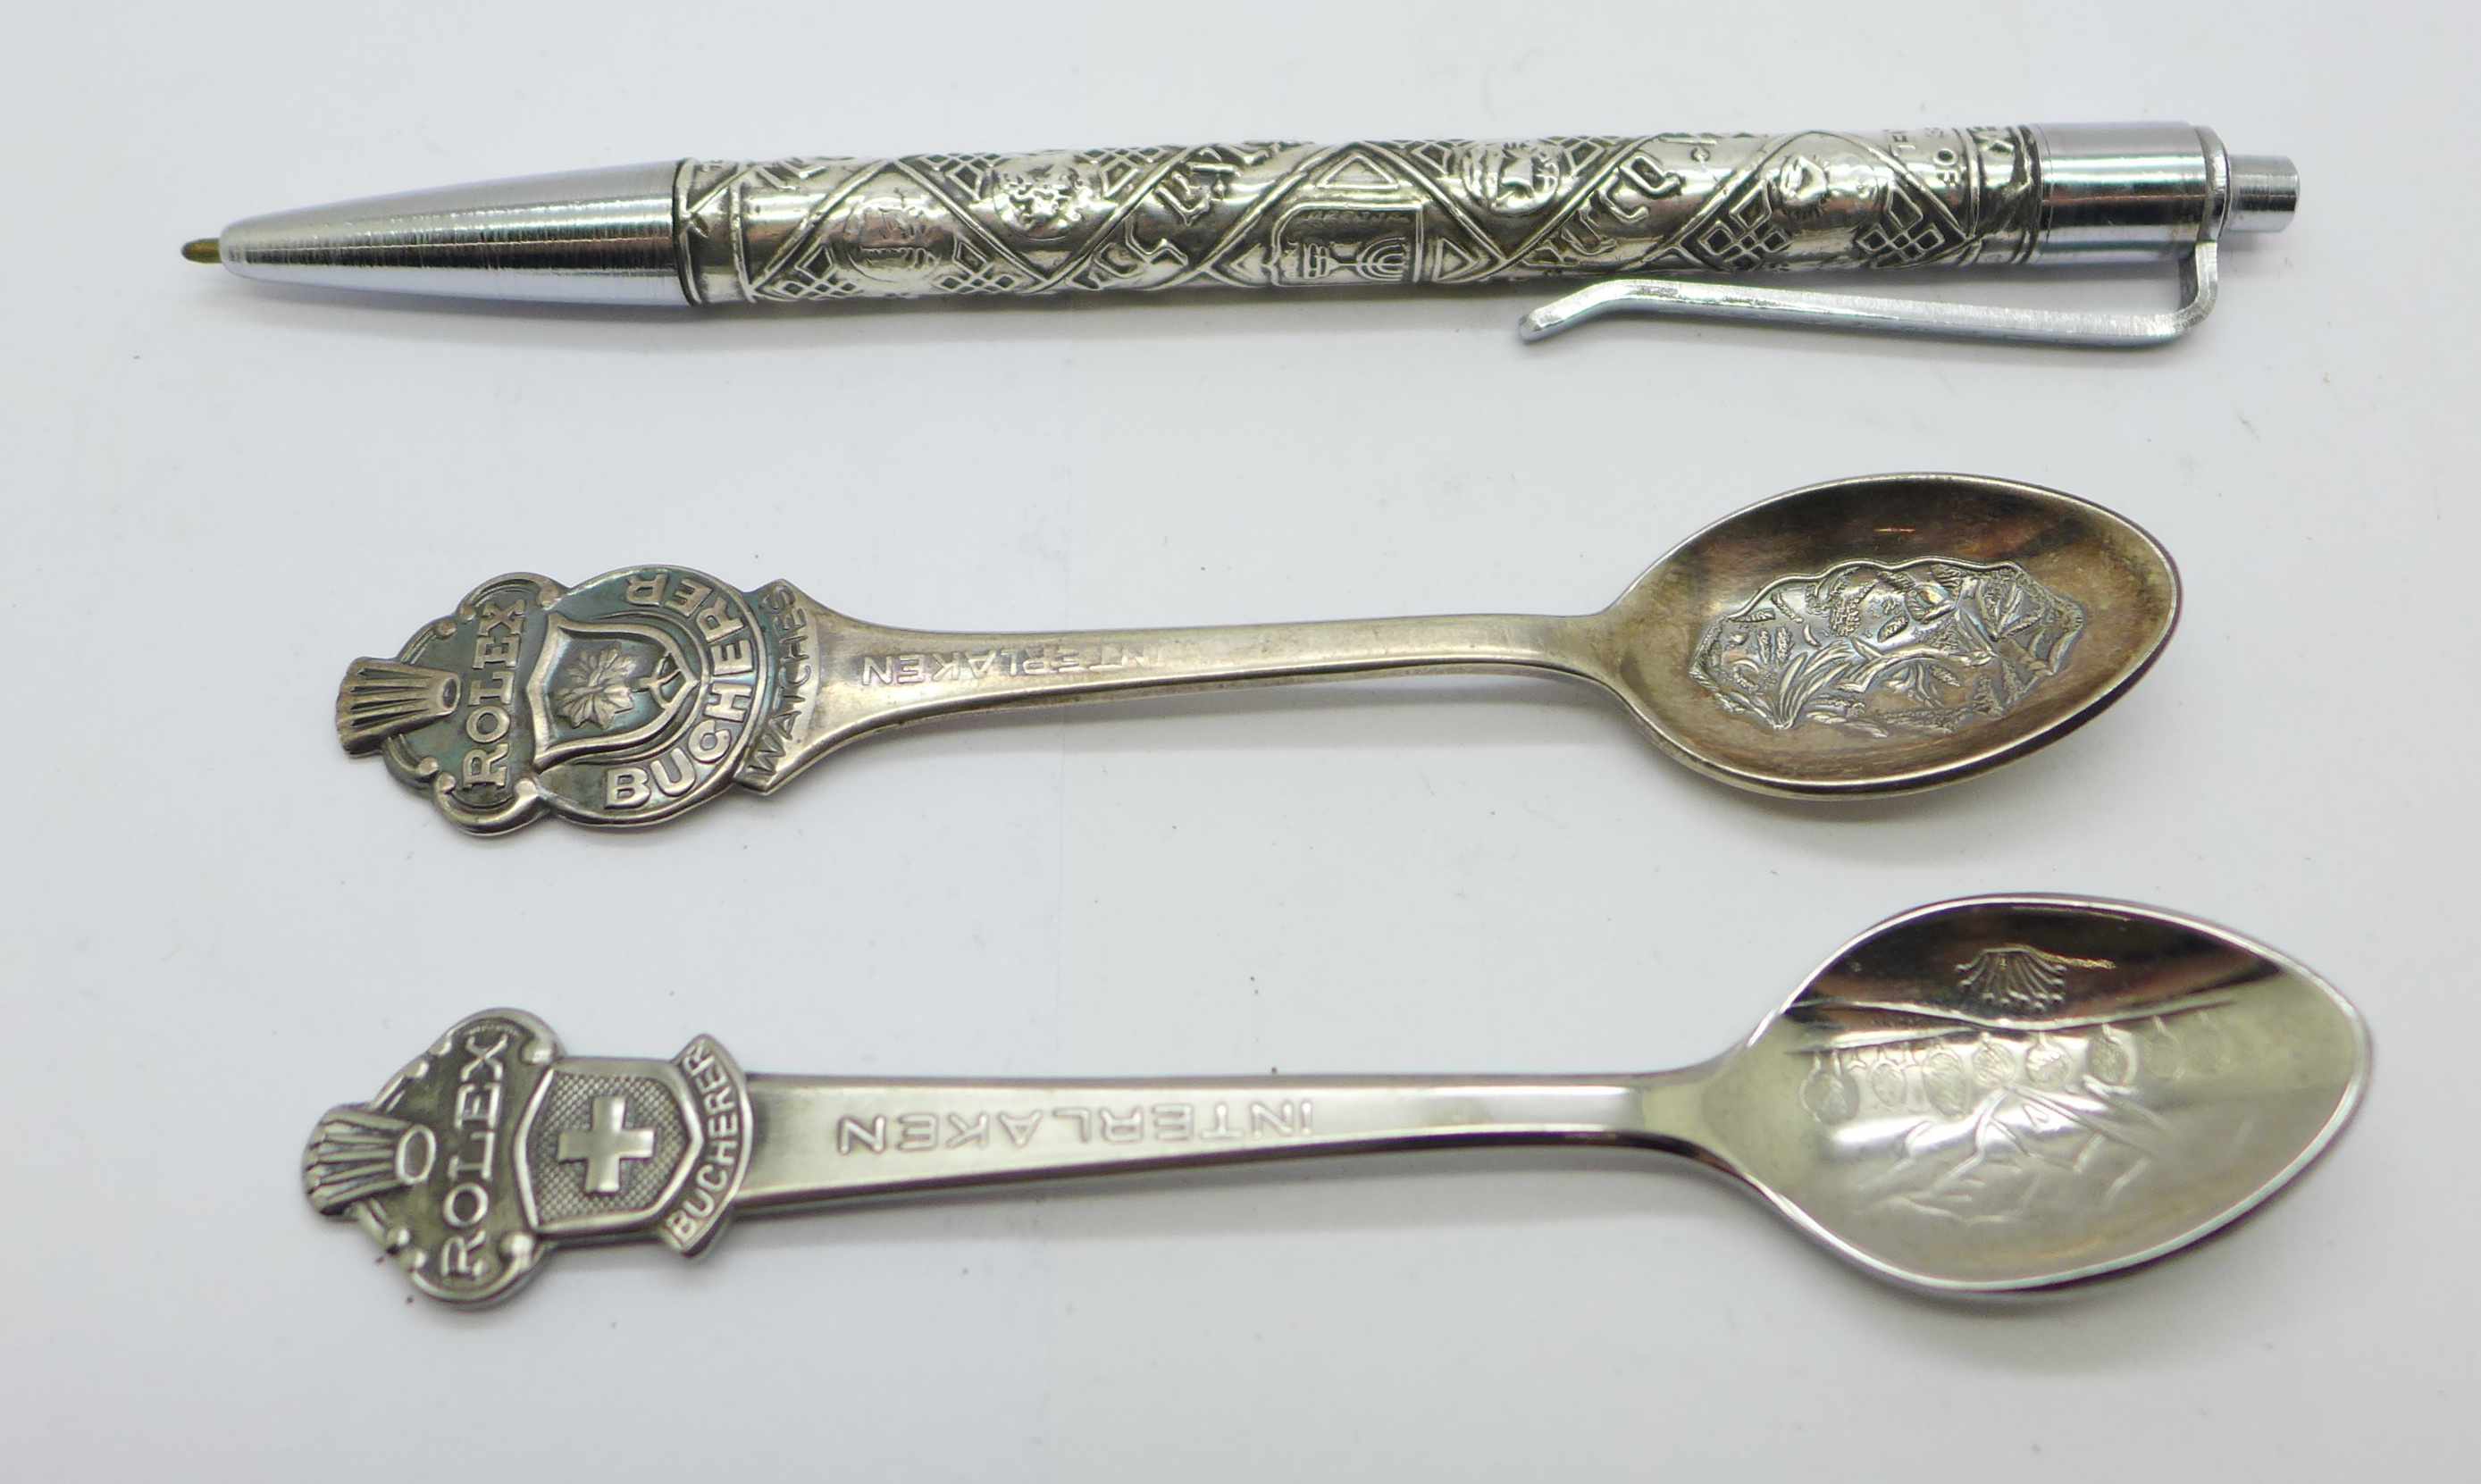 A sterling silver ballpoint pen, marked 'made in Israel' and 'Rolex', and two Rolex spoons